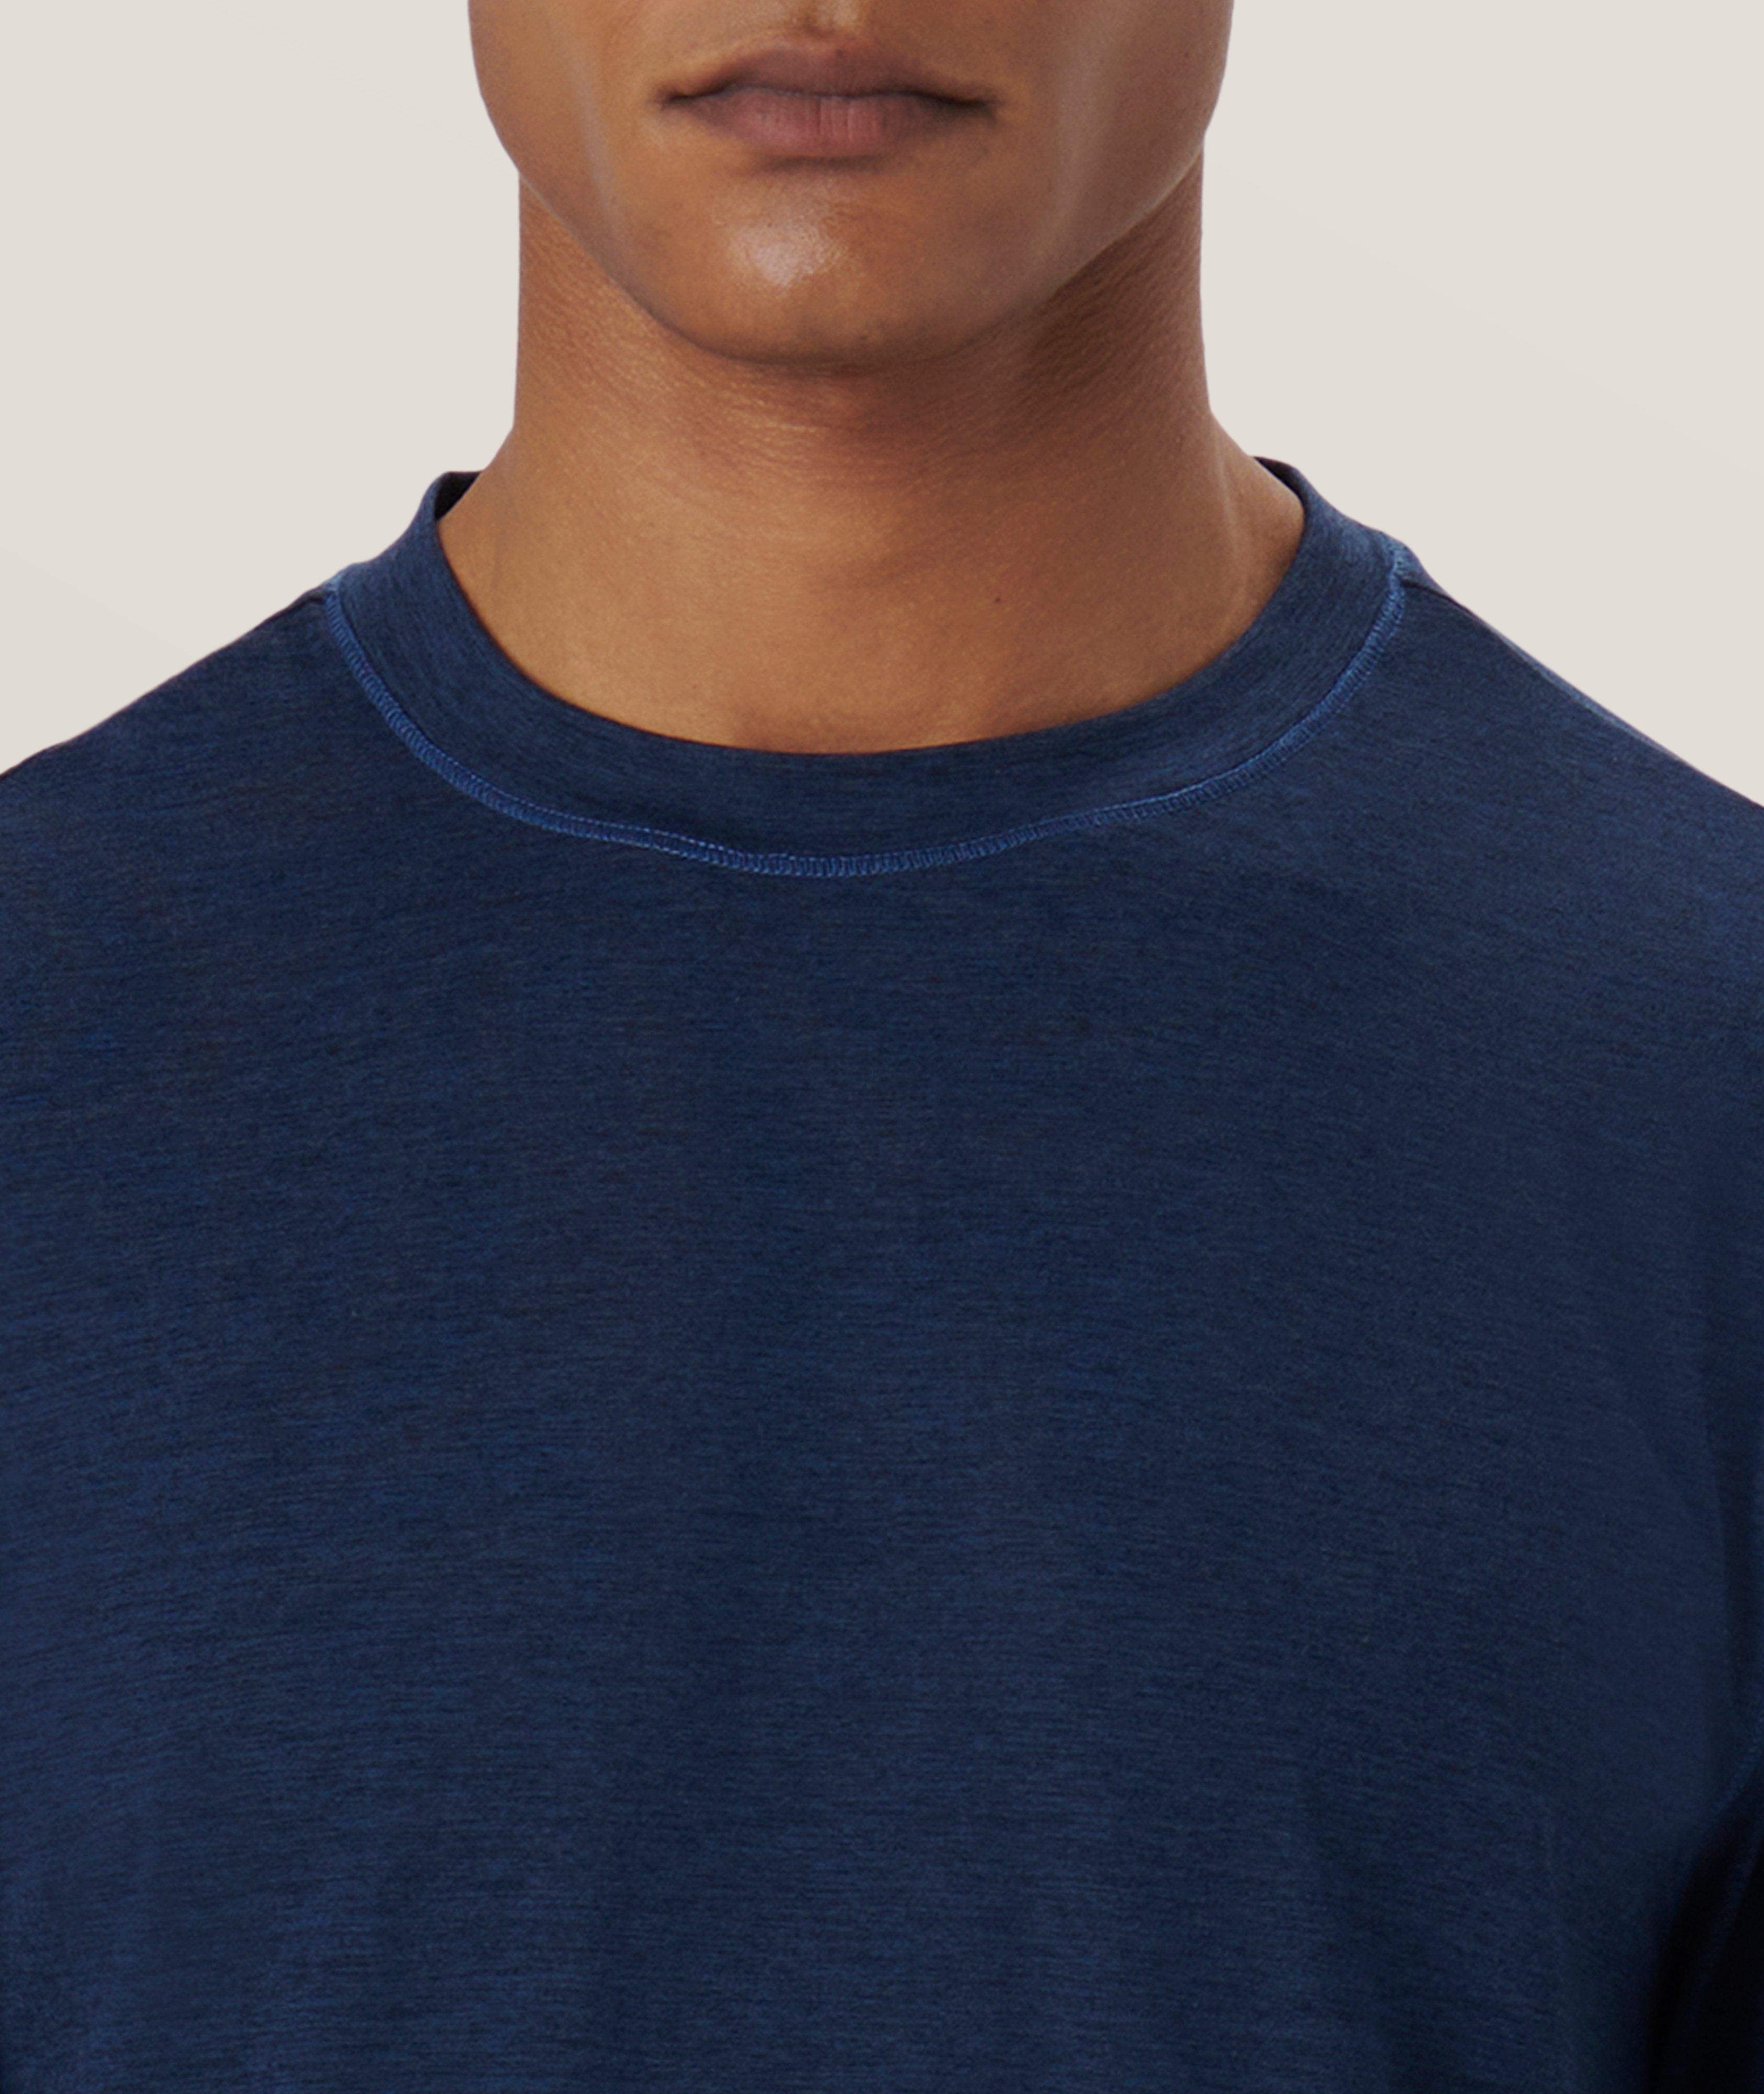 4-Way Stretch UV50 Performance Pullover image 1